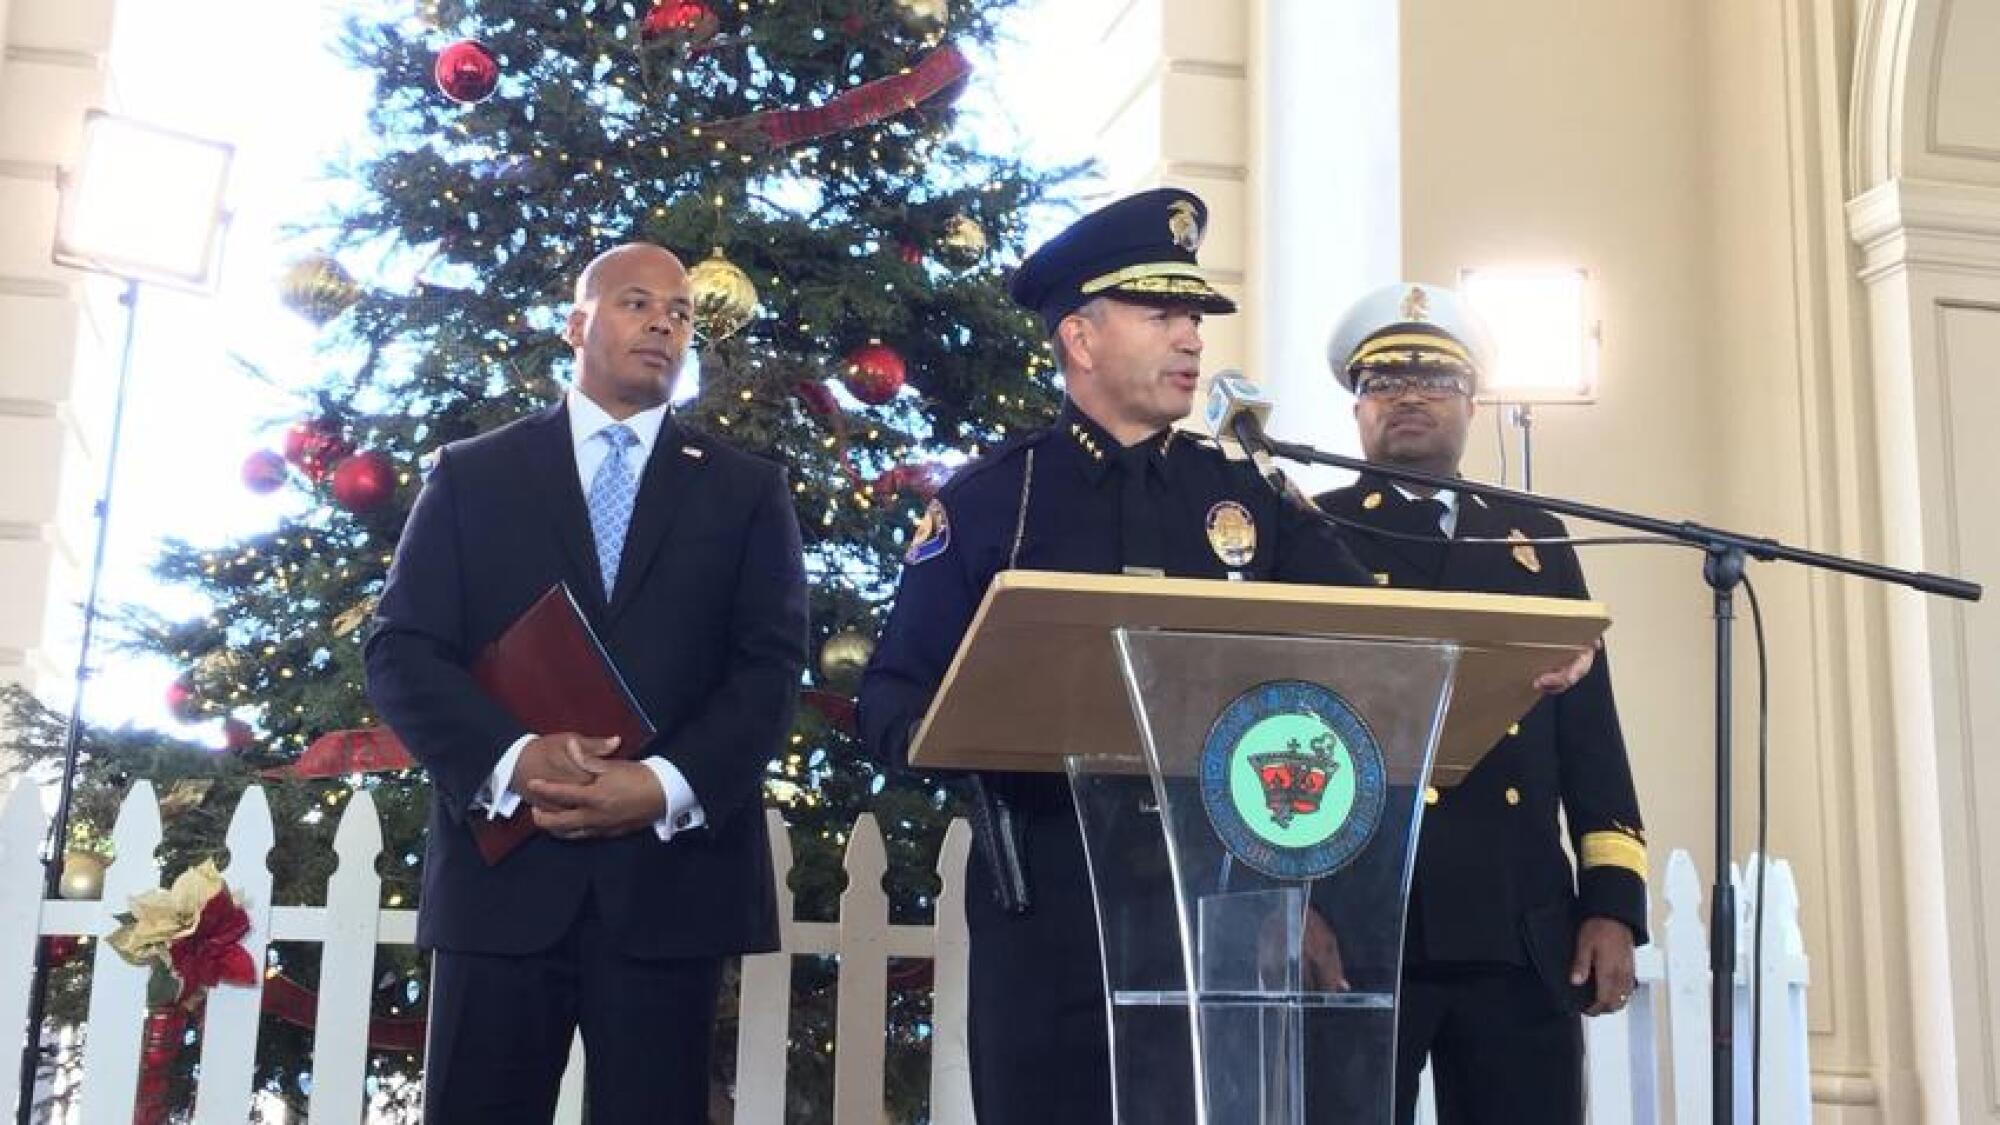 Pasadena Police Chief Phillip Sanchez, flanked by two men.